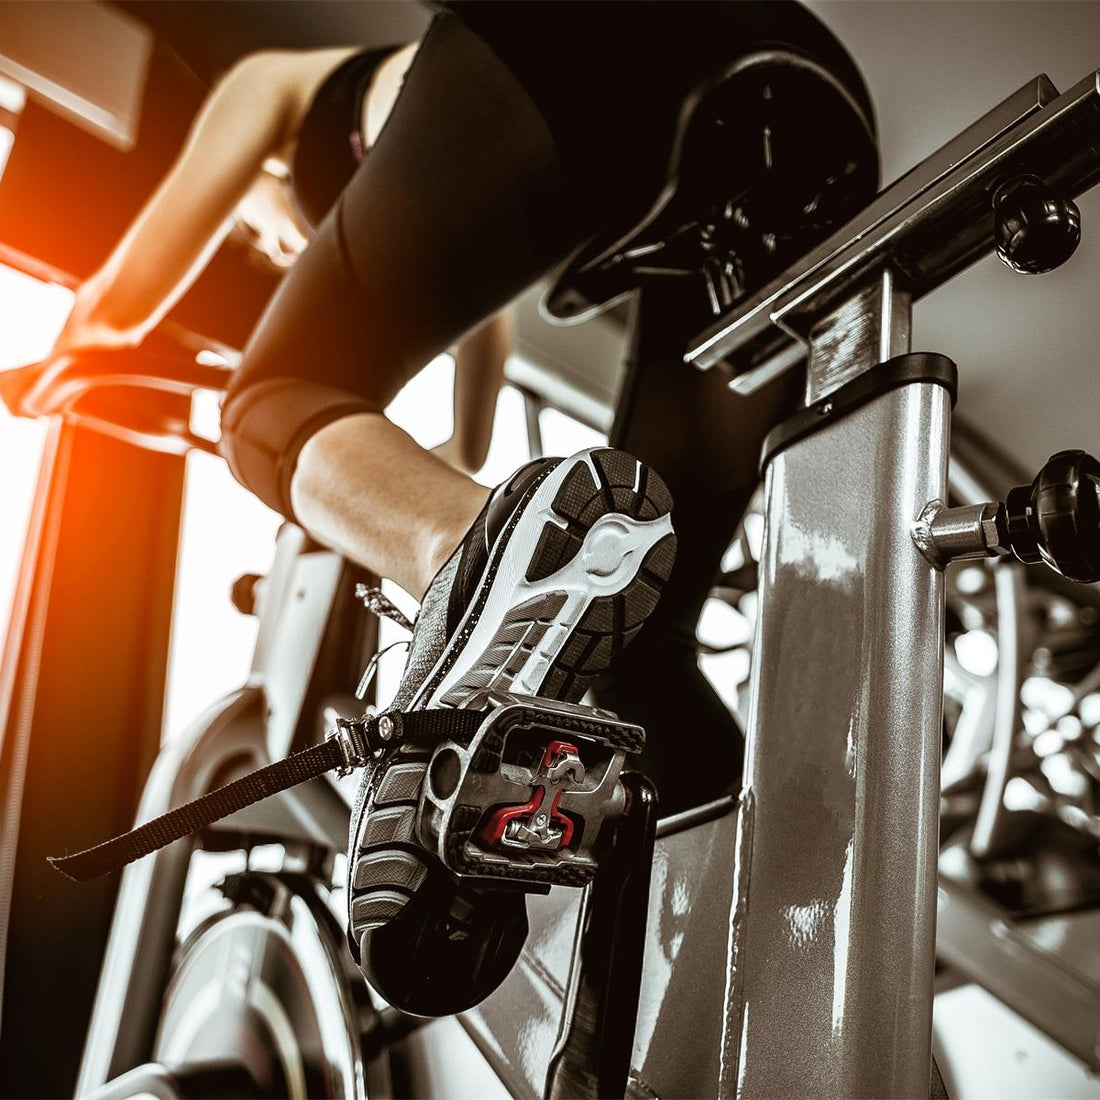 Are Exercise Bikes Good For Building Leg Muscles?